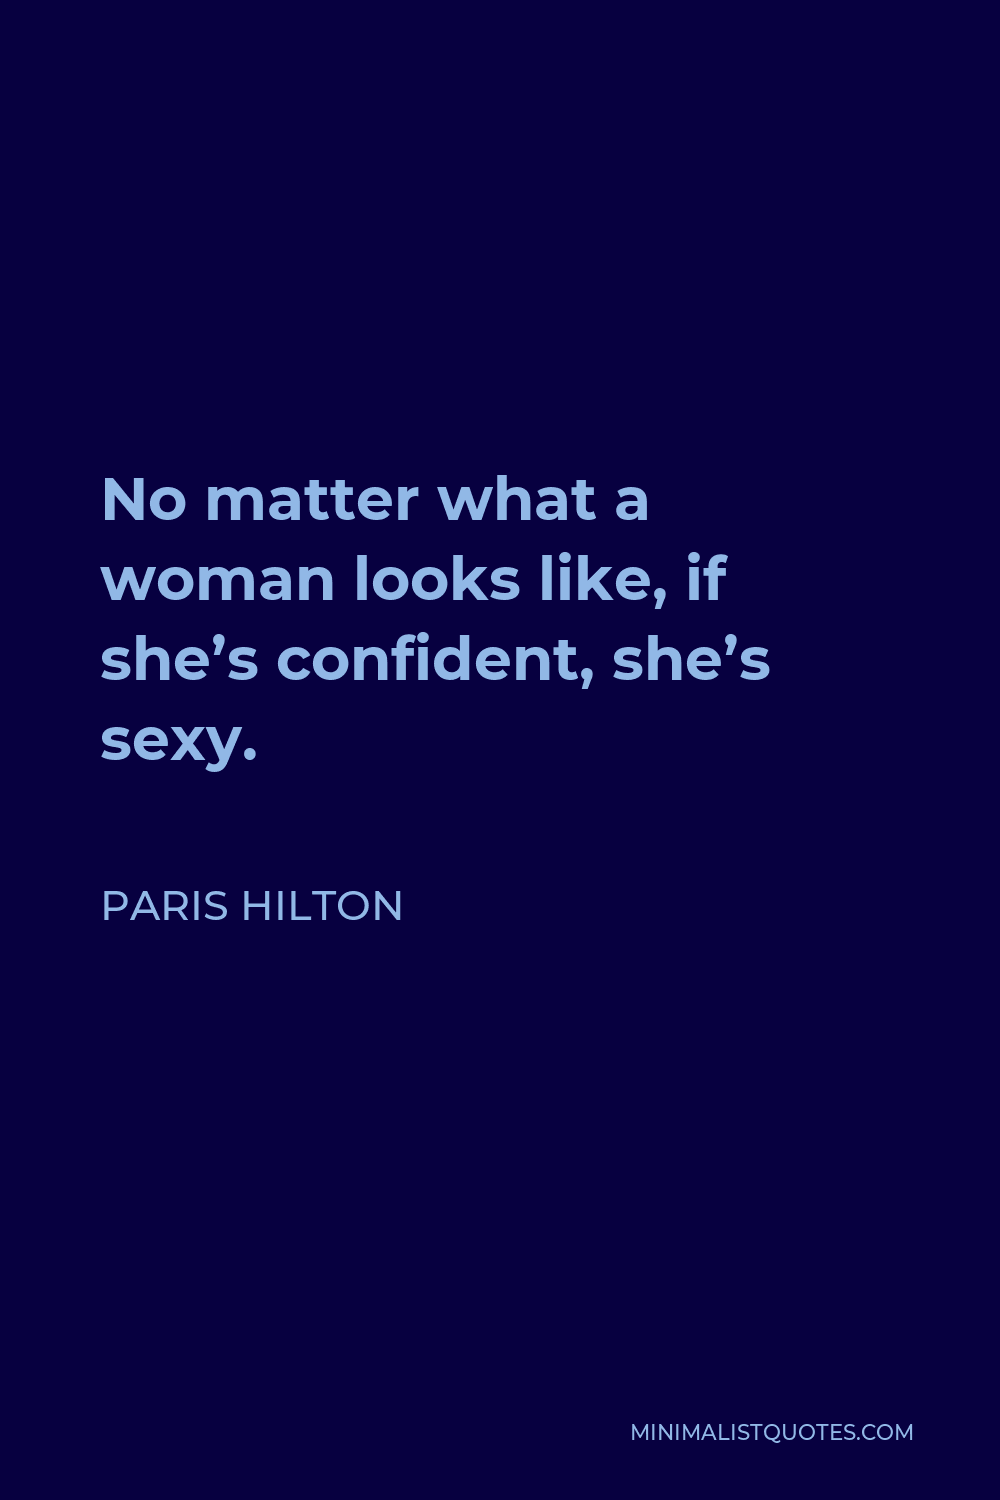 Paris Hilton Quote - No matter what a woman looks like, if she’s confident, she’s sexy.